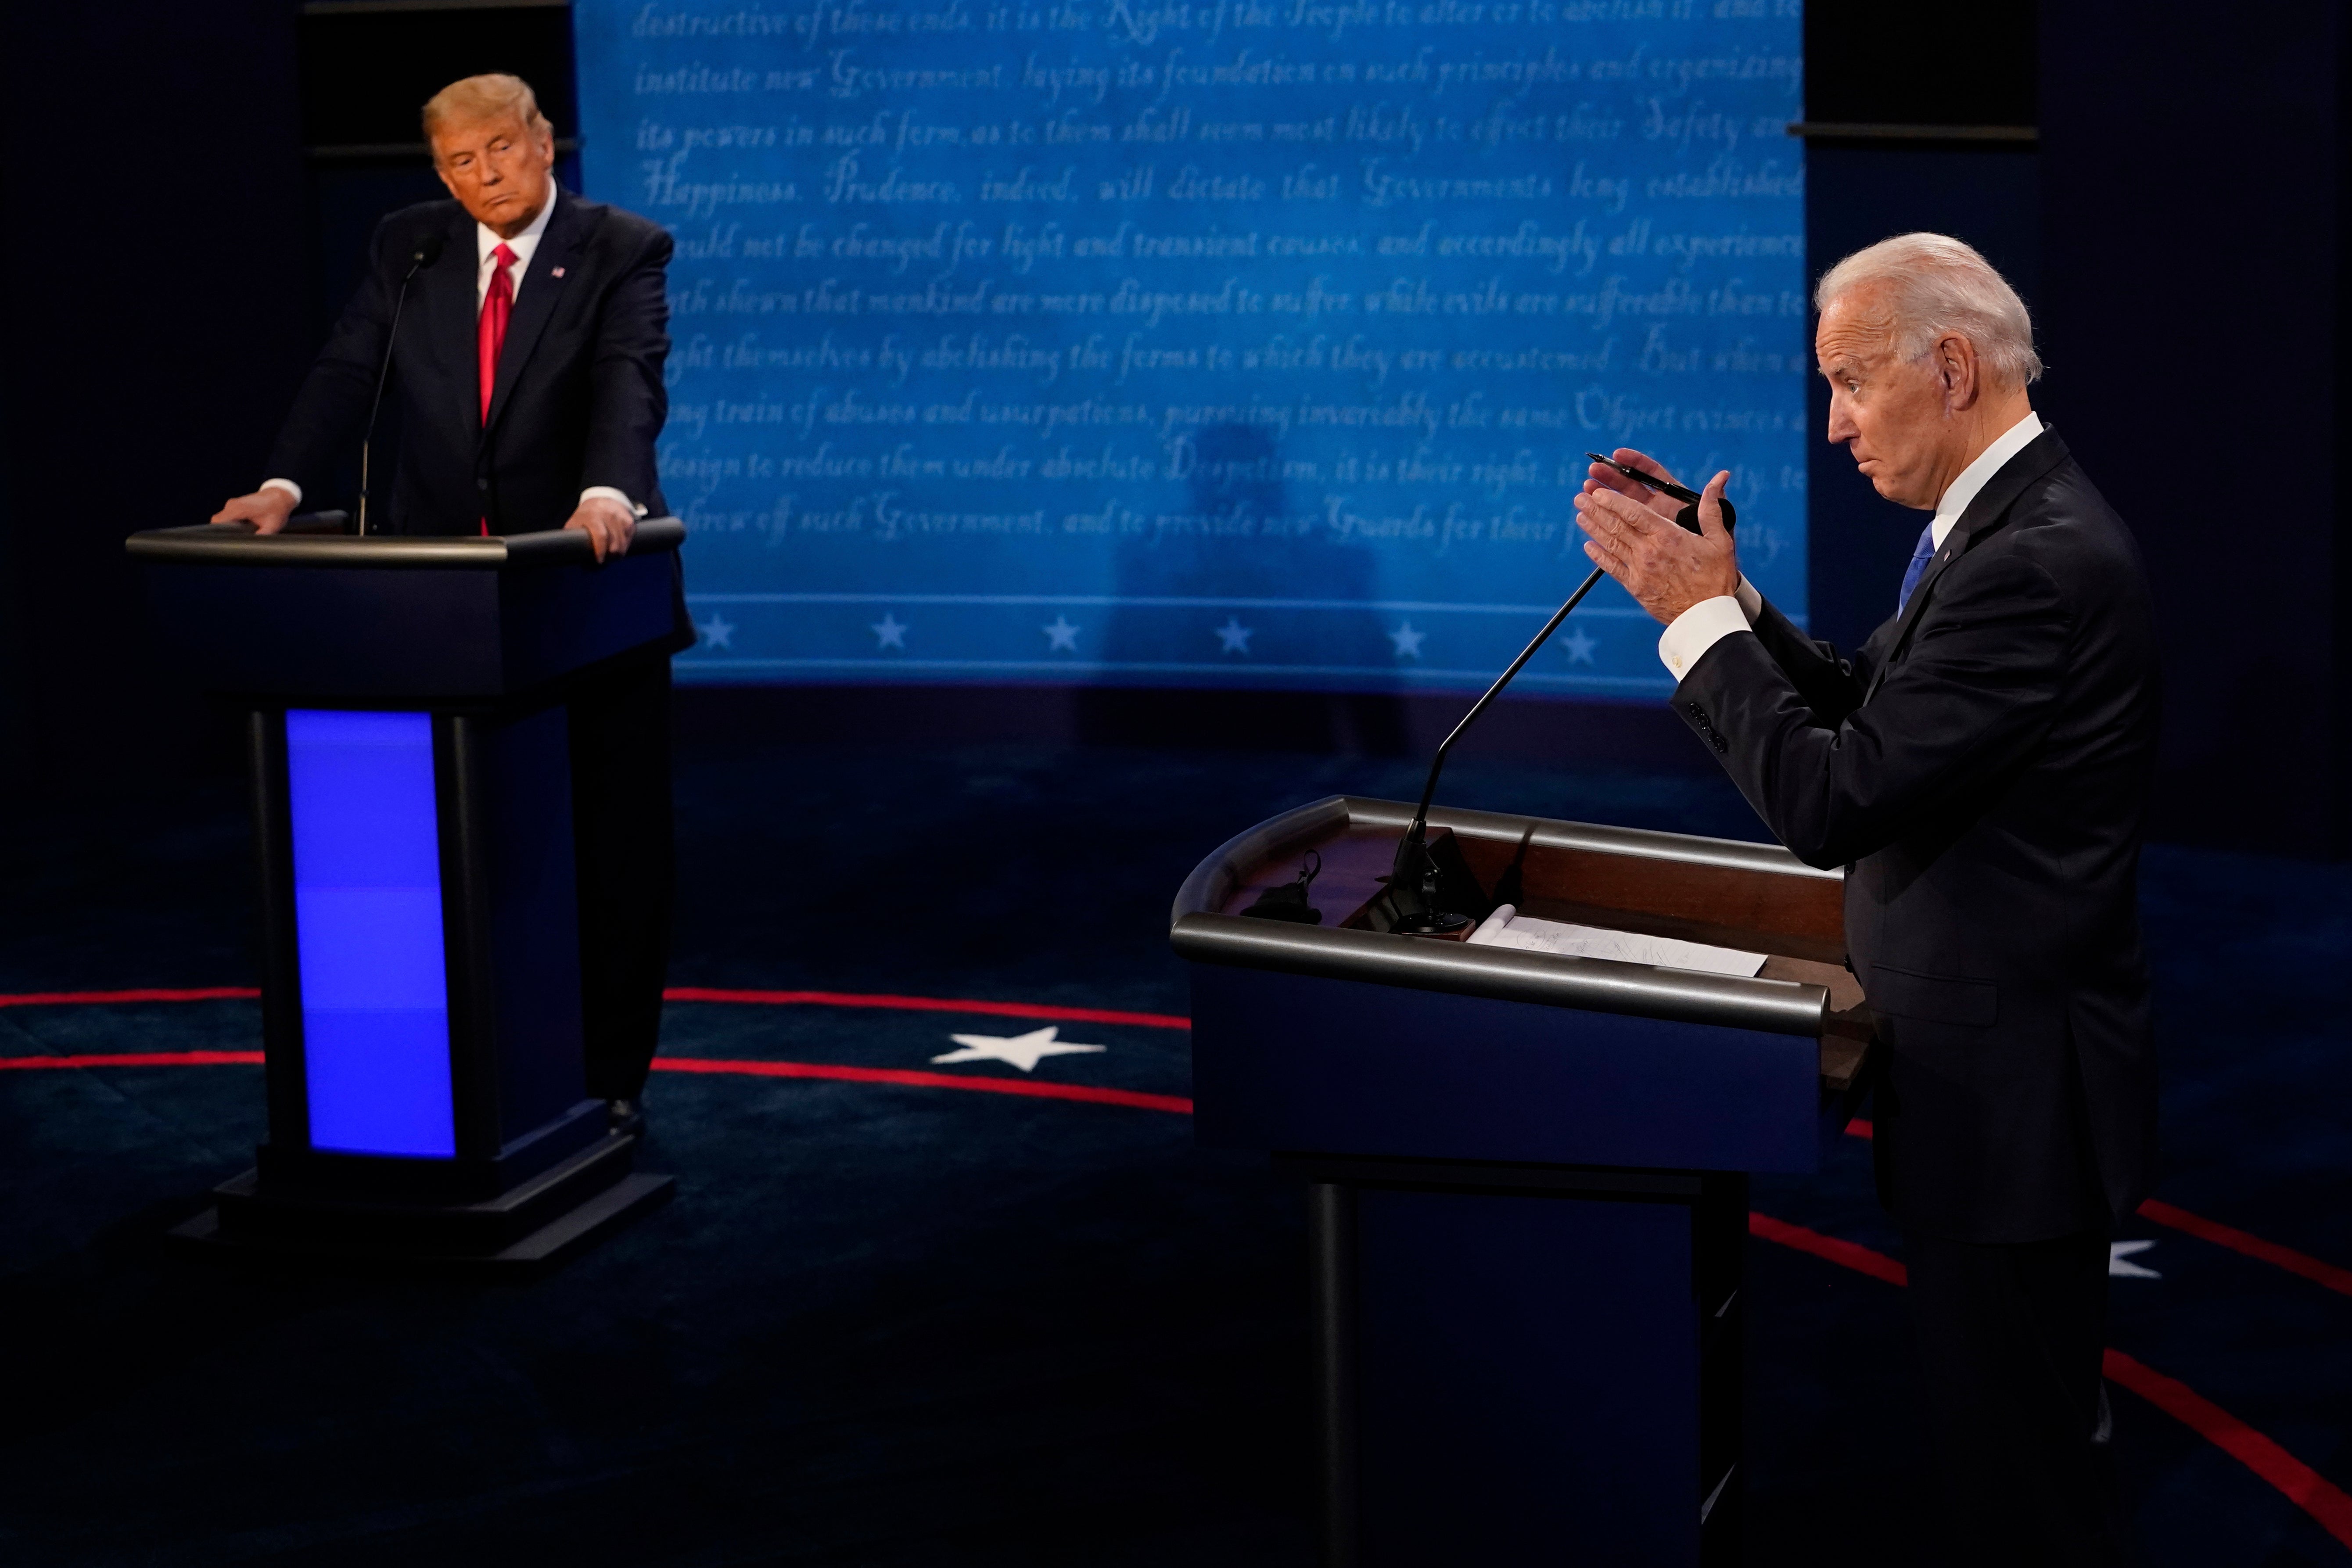 Democratic presidential candidate former Vice President Joe Biden, right, answers a question as President Donald Trump listens during the second and final presidential debate on Oct. 22, 2020